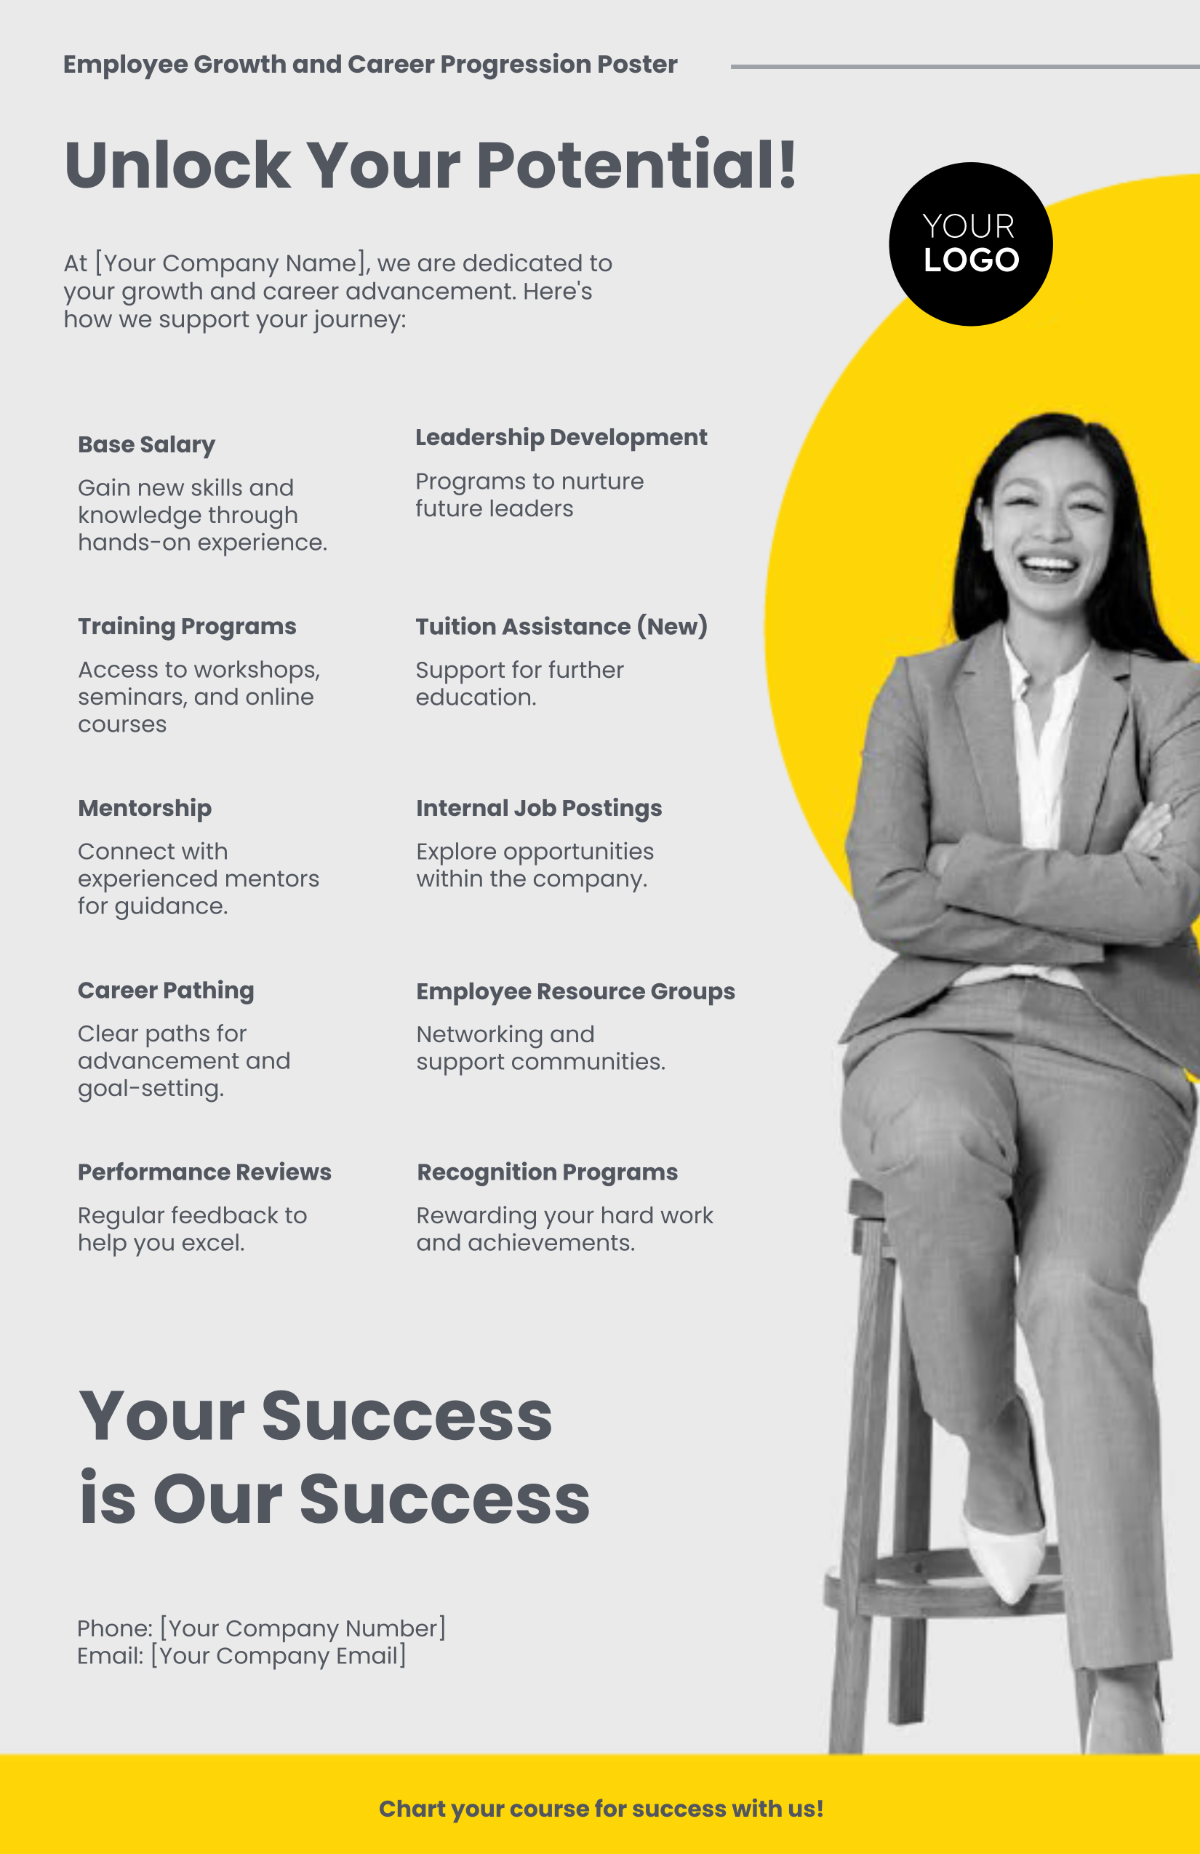 Employee Growth and Career Progression Poster HR